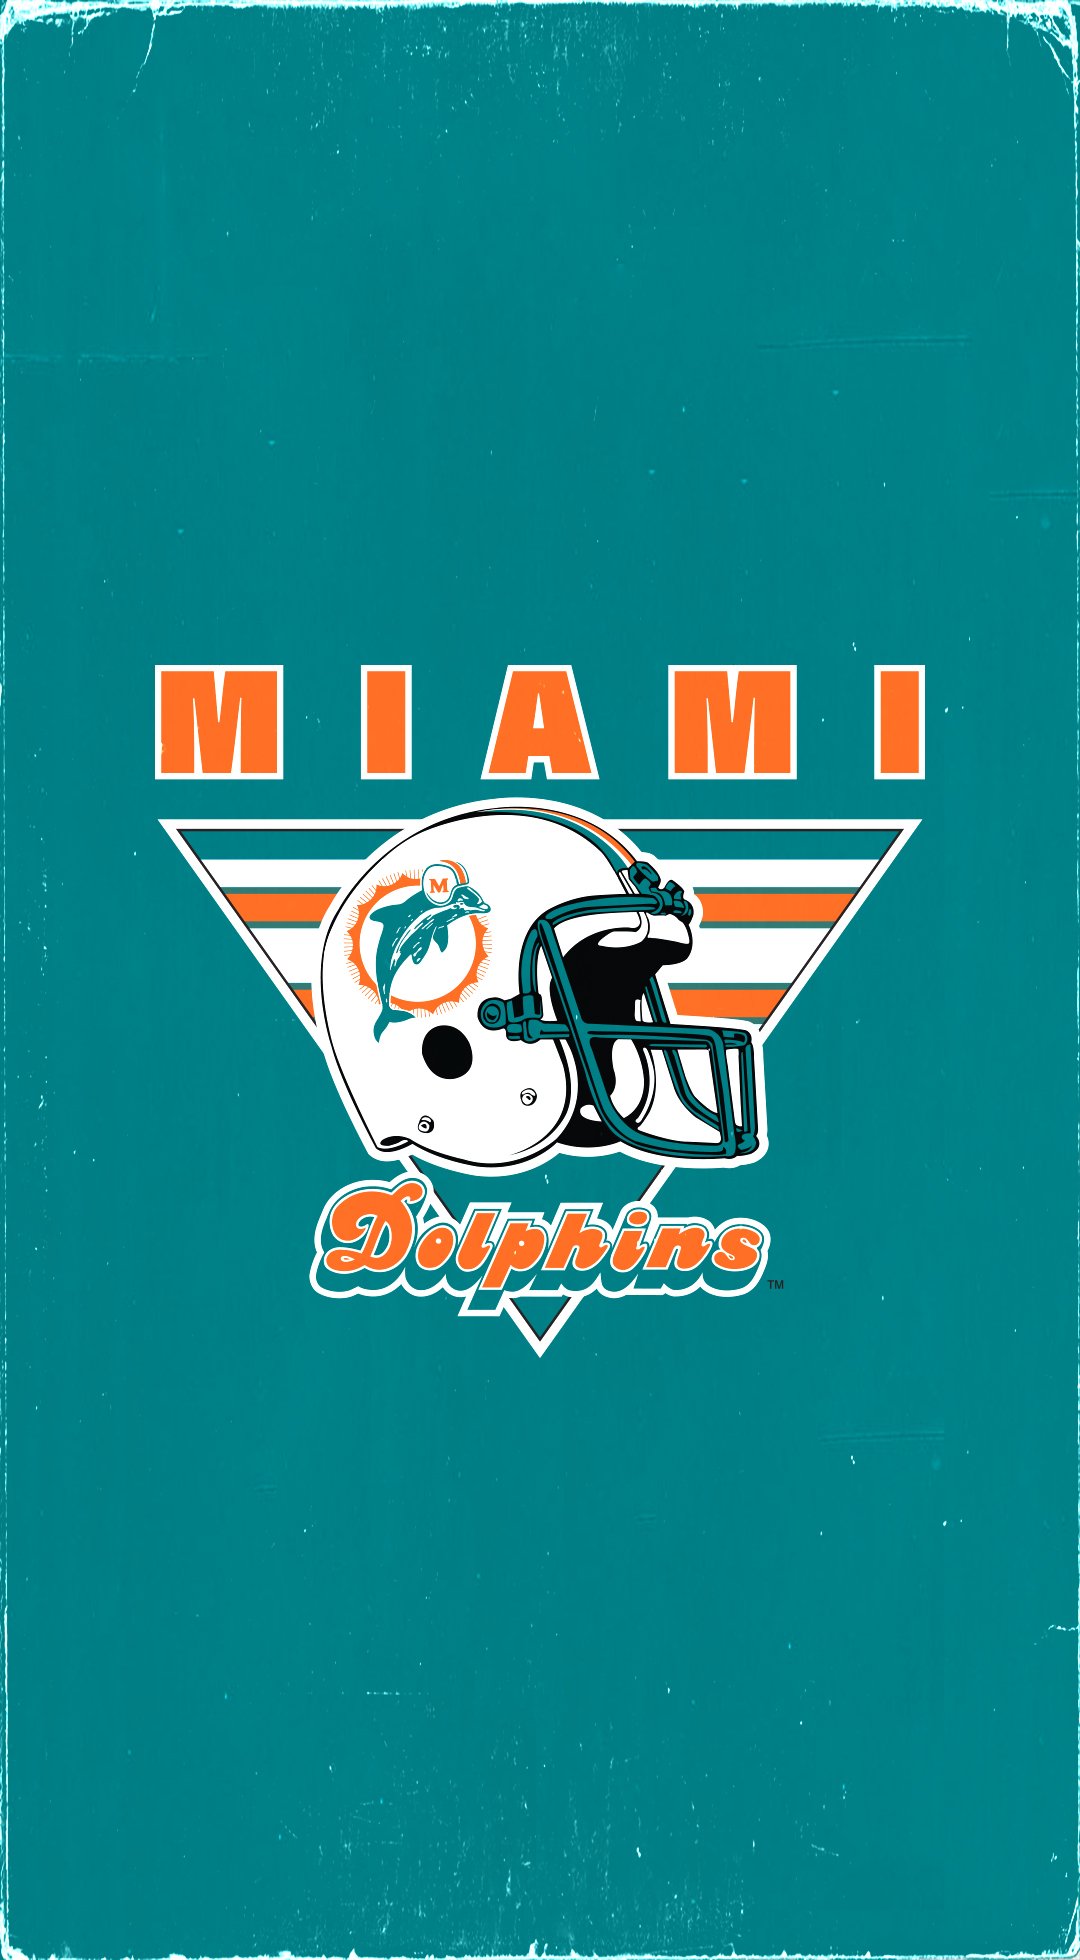 Miami Dolphins on X: 'Classic vibes 